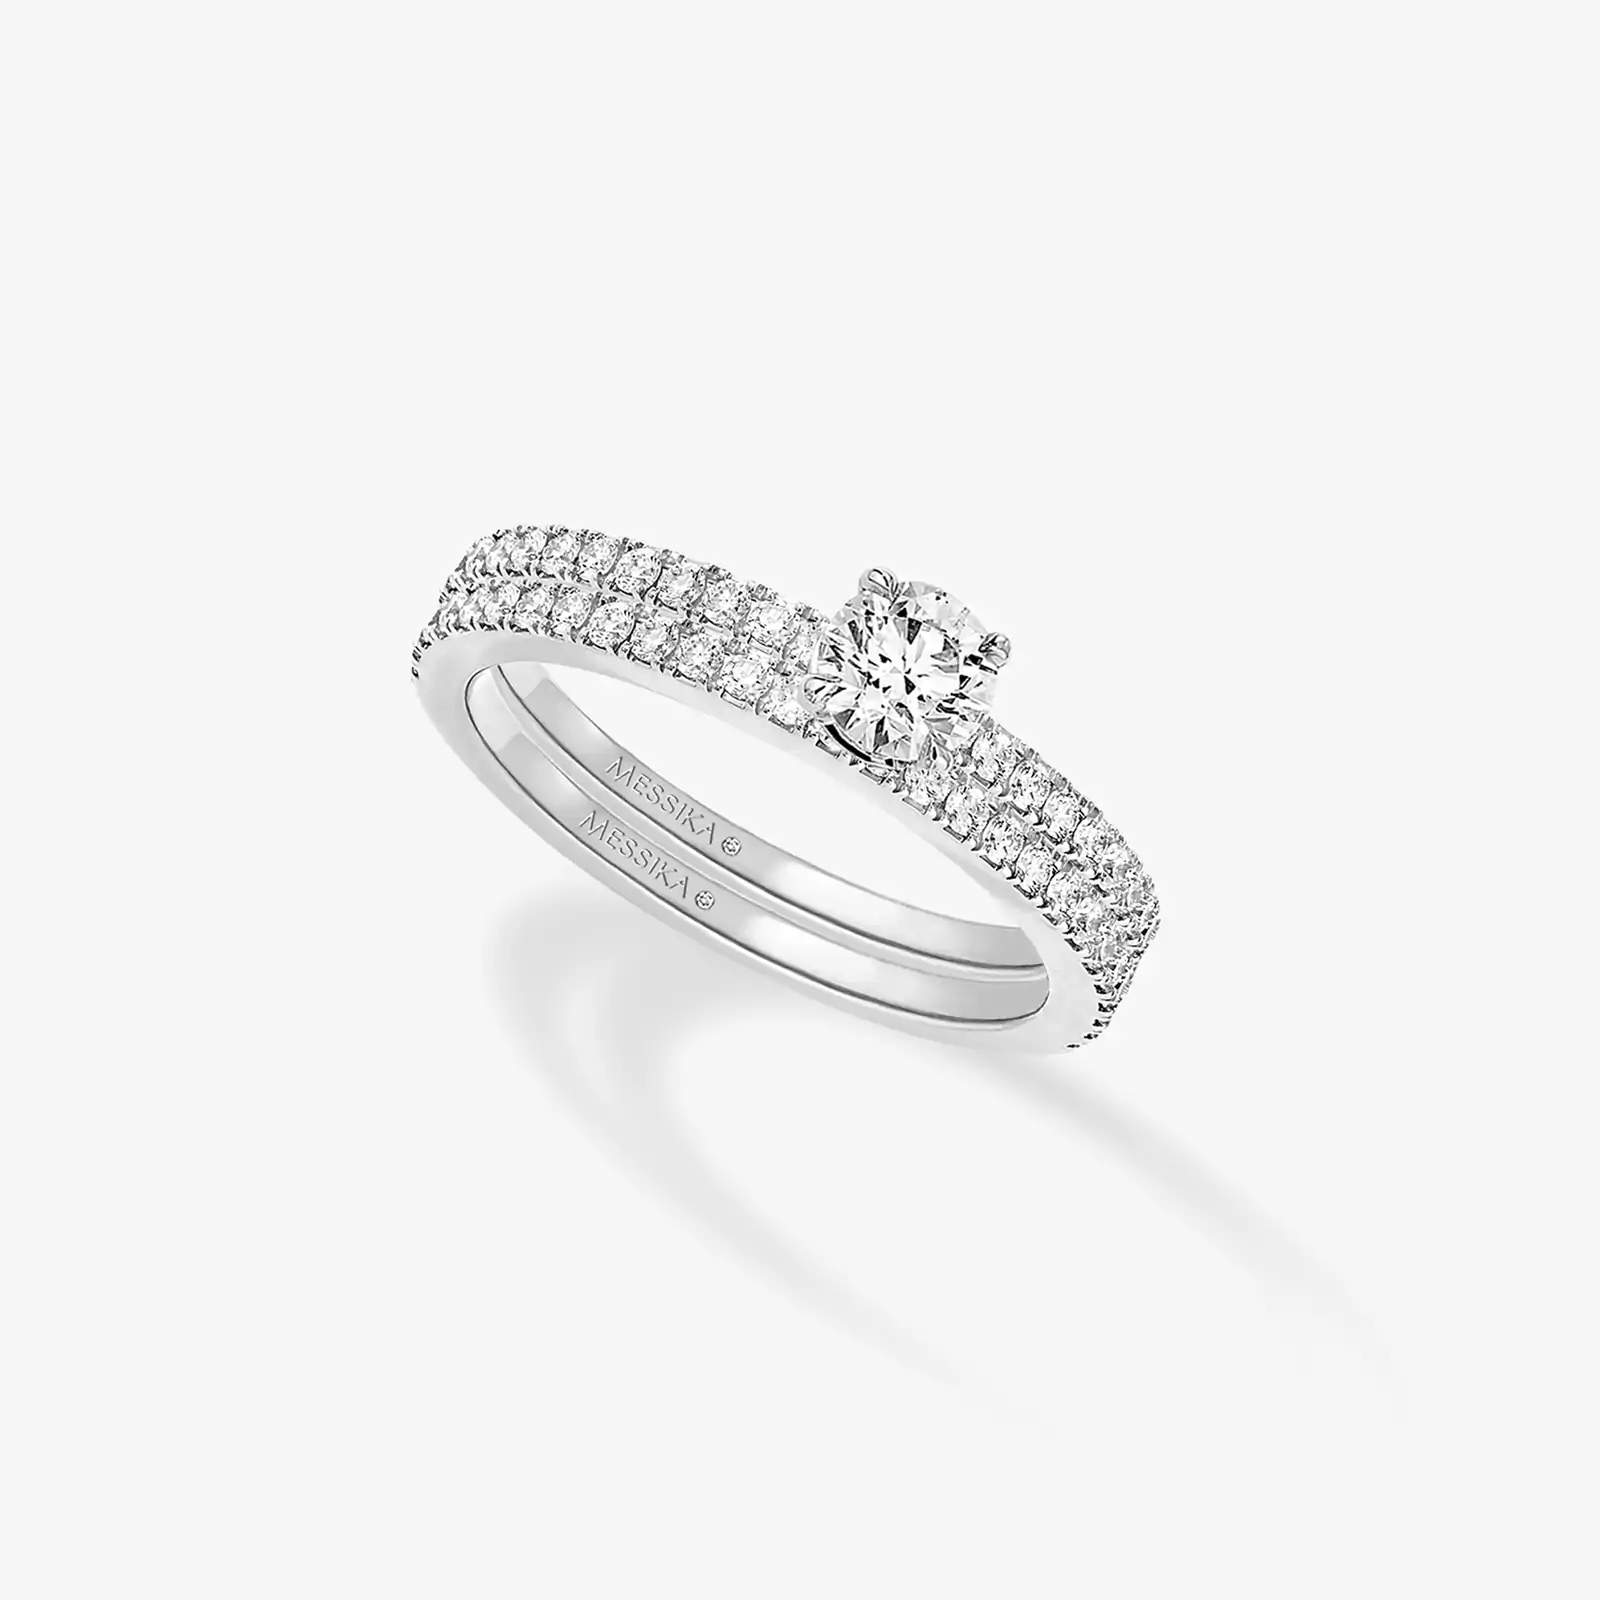 Alliance Duo Solitaire White Gold For Her Diamond Ring 08288-WG